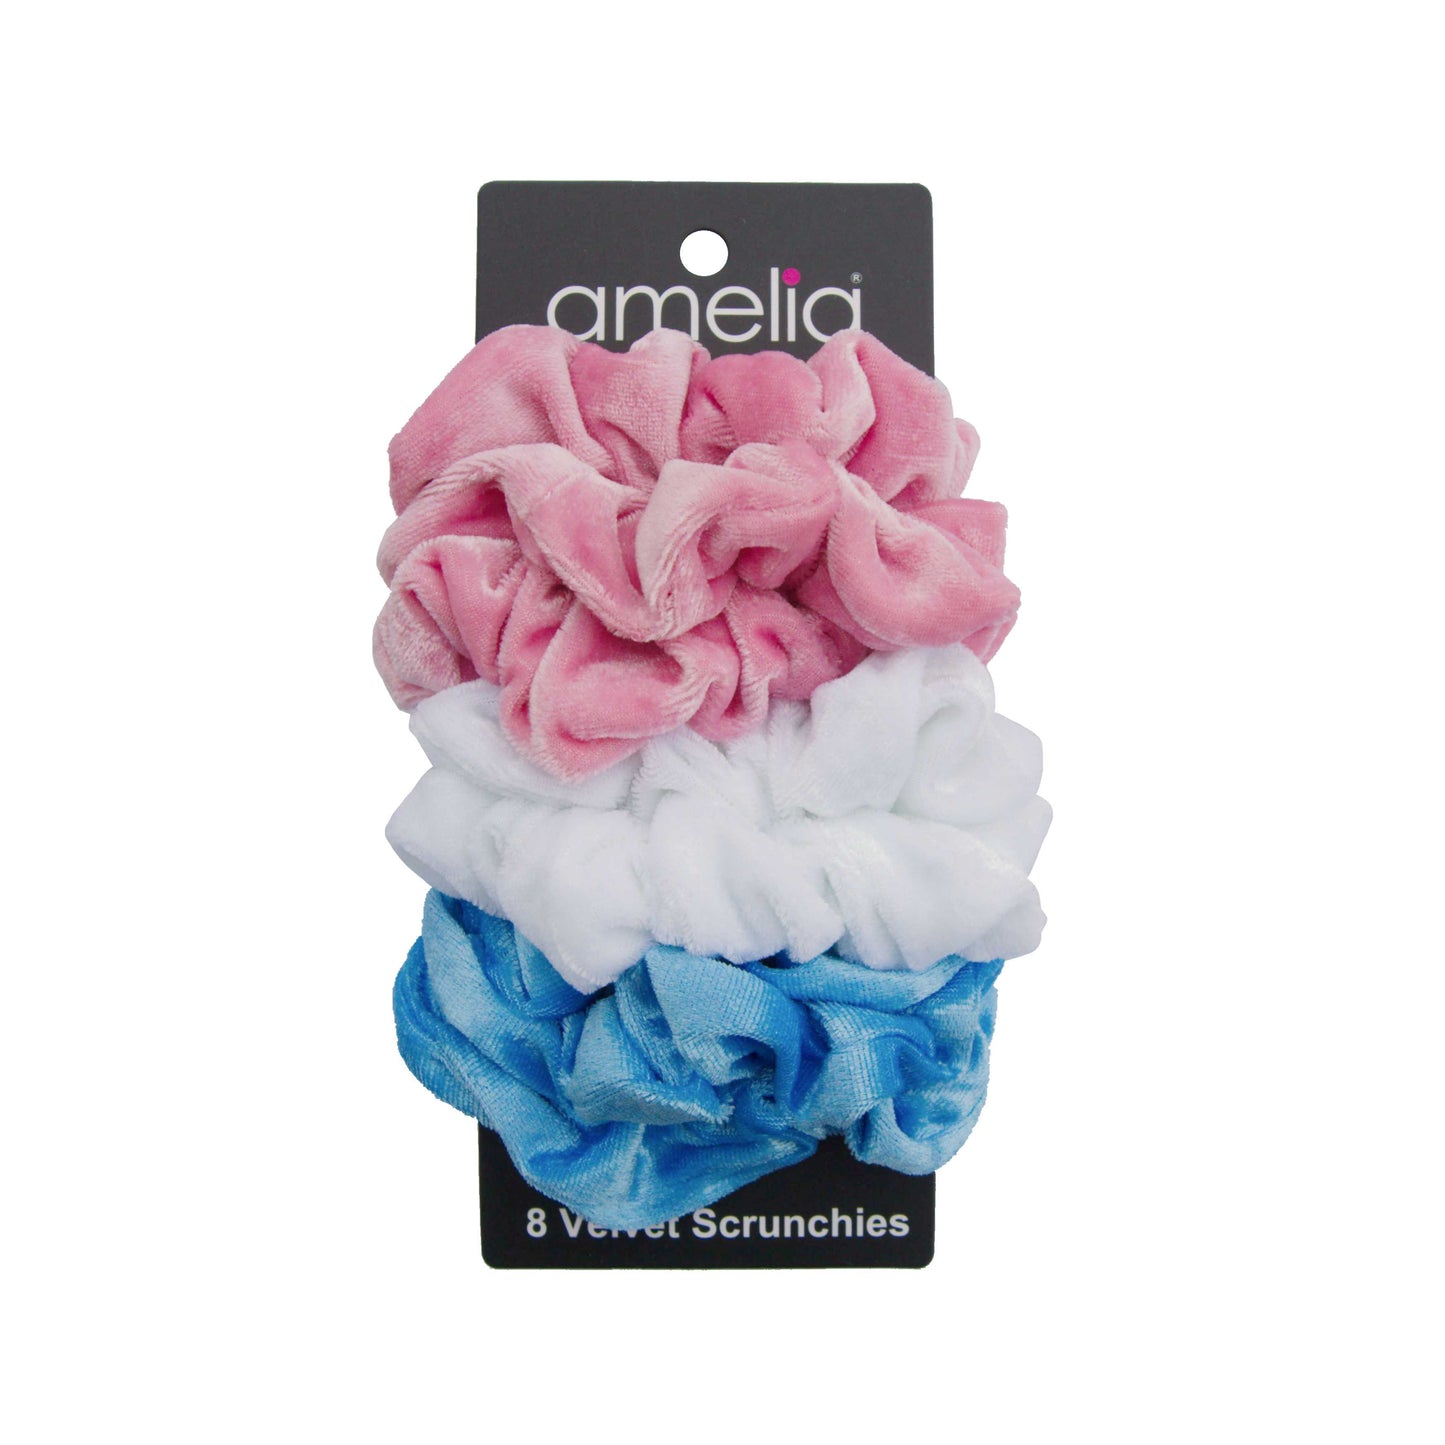 Amelia Beauty, Pastel Mix Velvet Scrunchies, 3.5in Diameter, Gentle on Hair, Strong Hold, No Snag, No Dents or Creases. 8 Pack